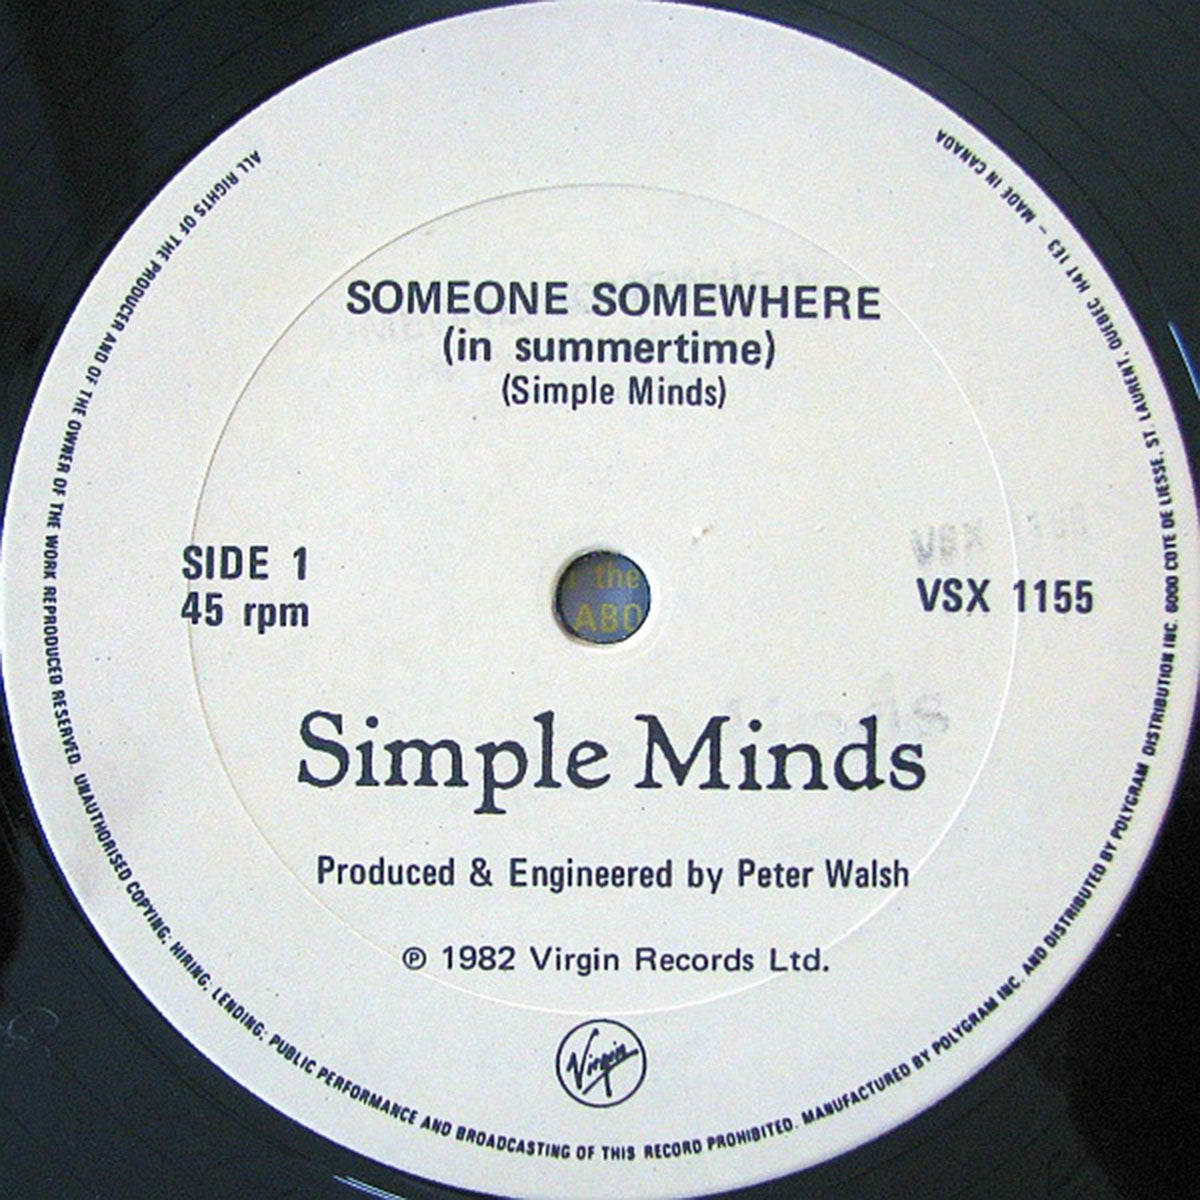 Simple Minds – Someone Somewhere (In Summertime)